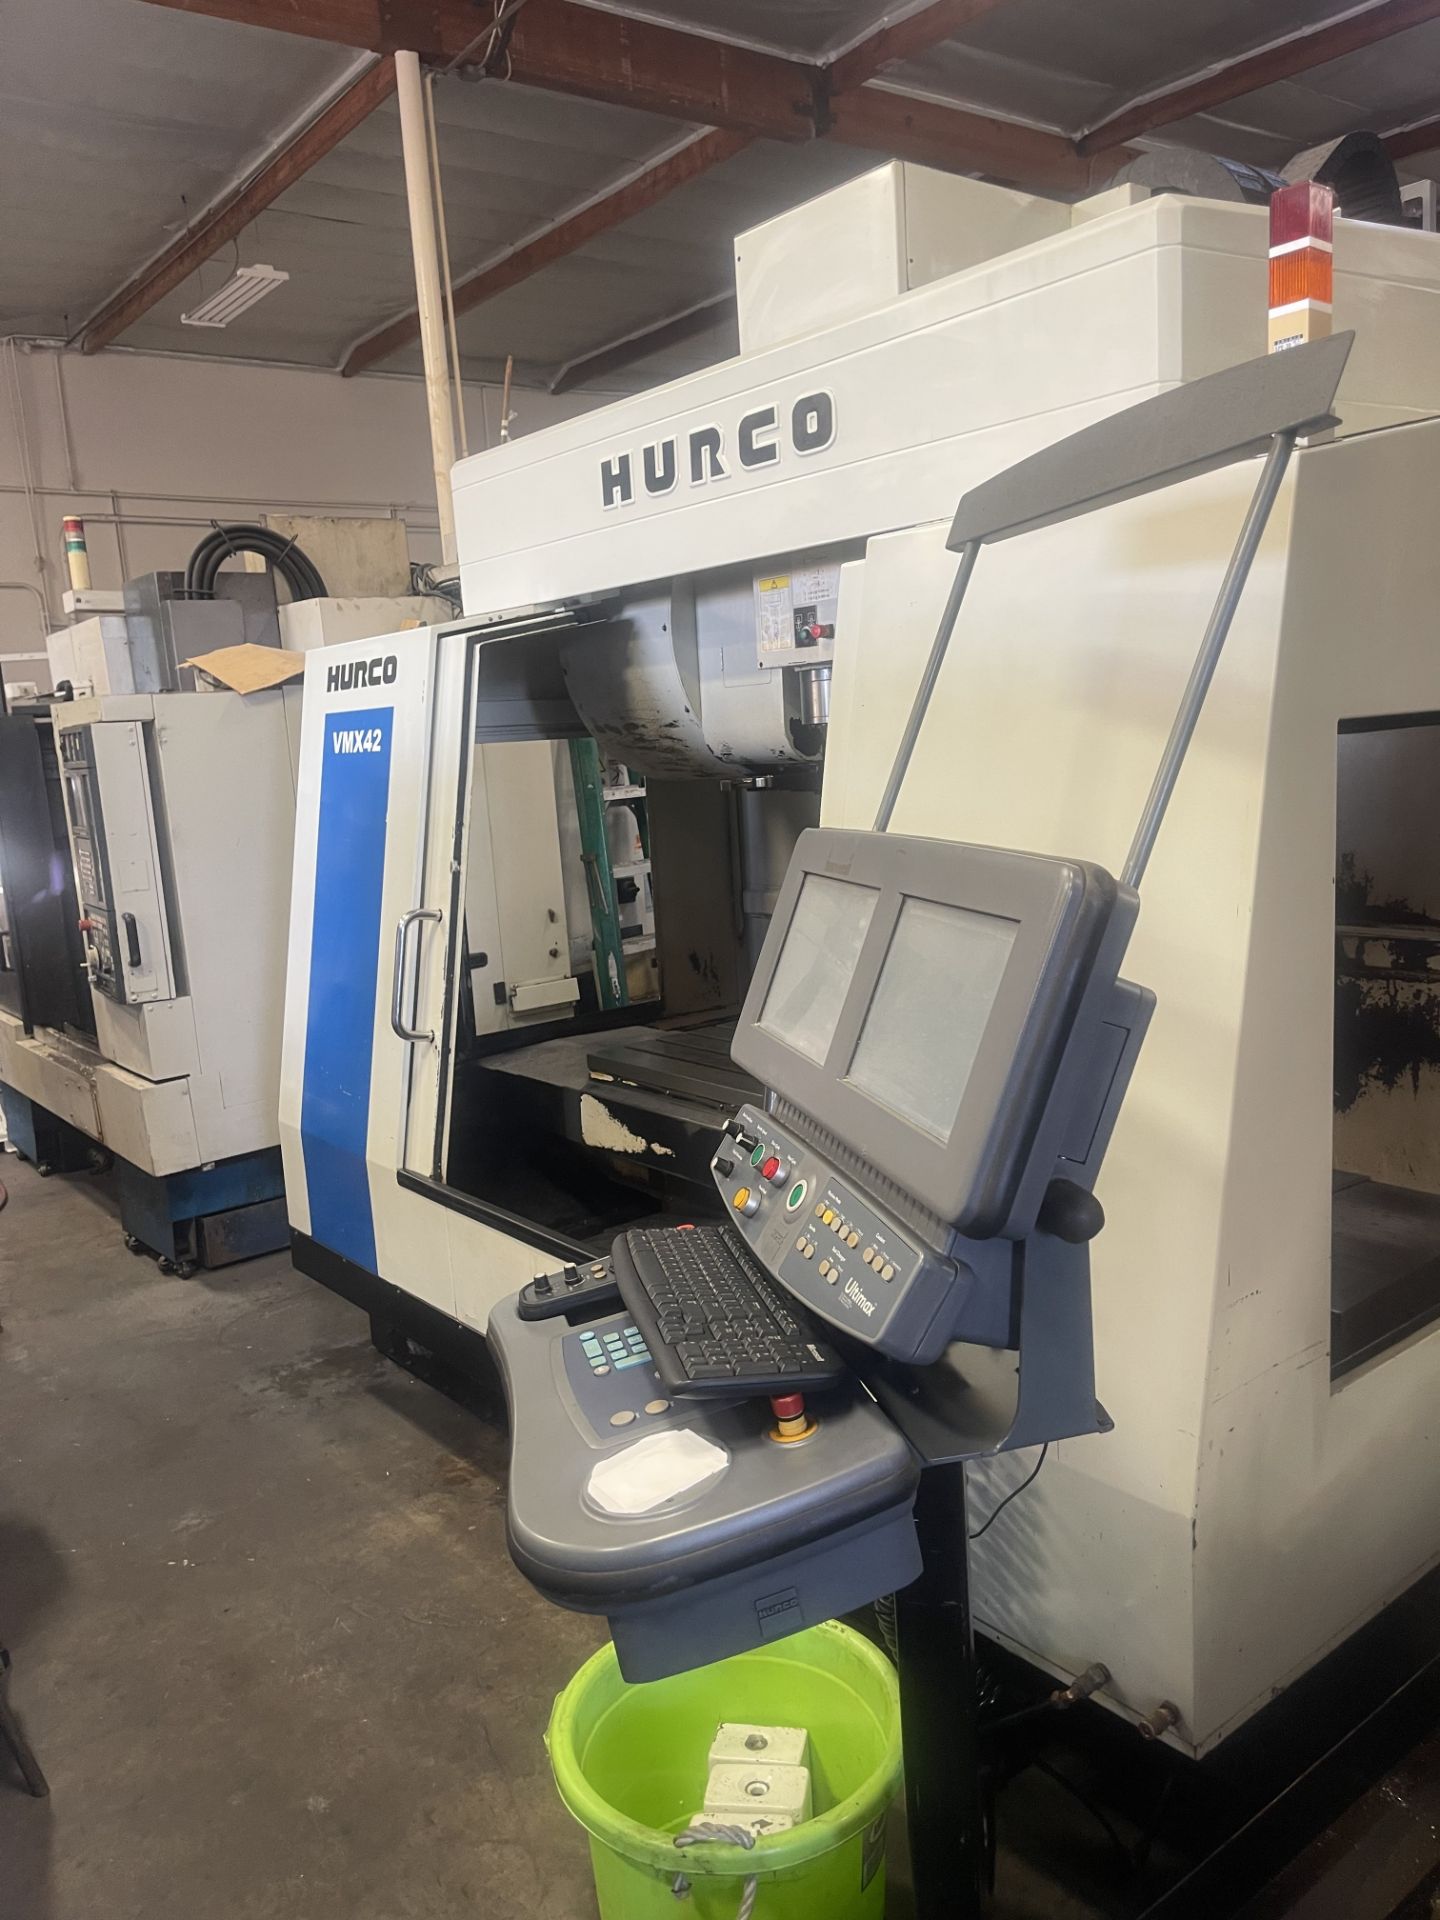 2006 Hurco VMX42, CNC Vertical Machining Centers - Image 2 of 8